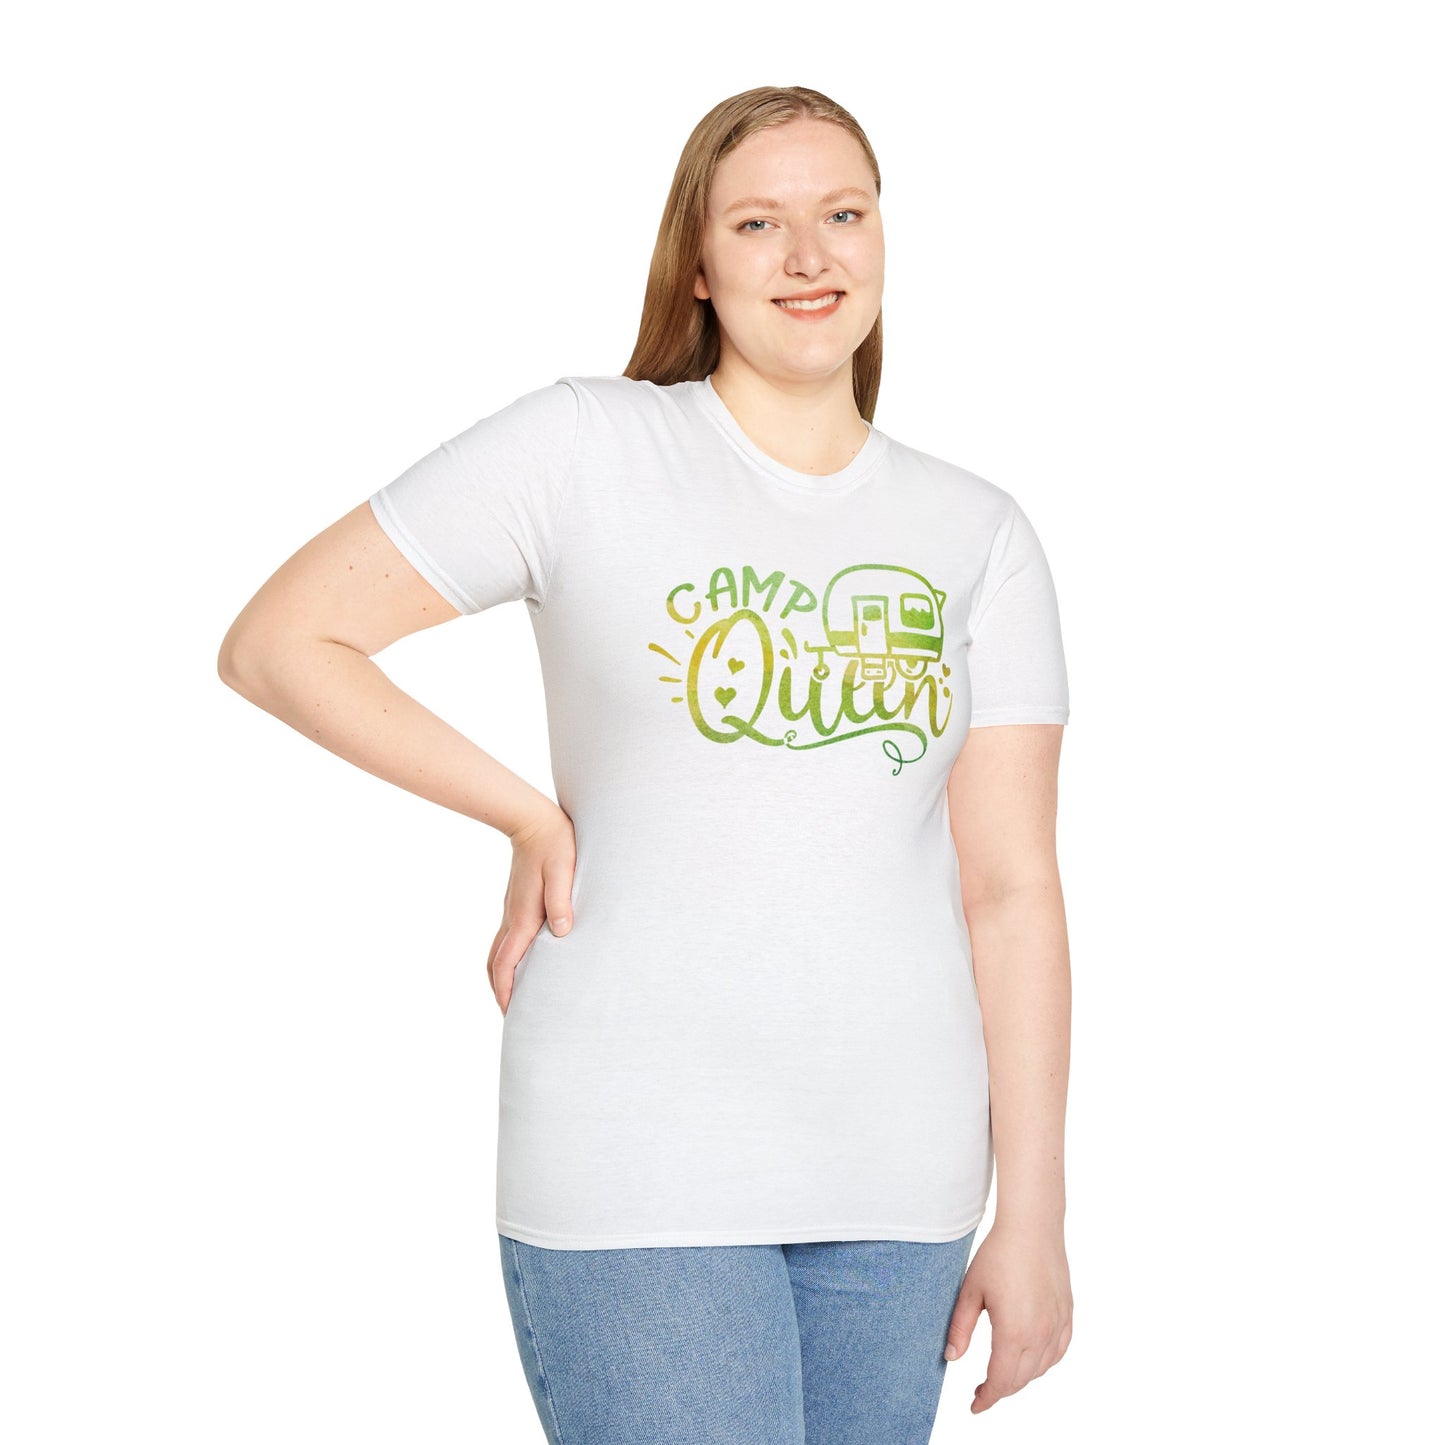 Camp Queen Tee - Camping Themed Shirt!